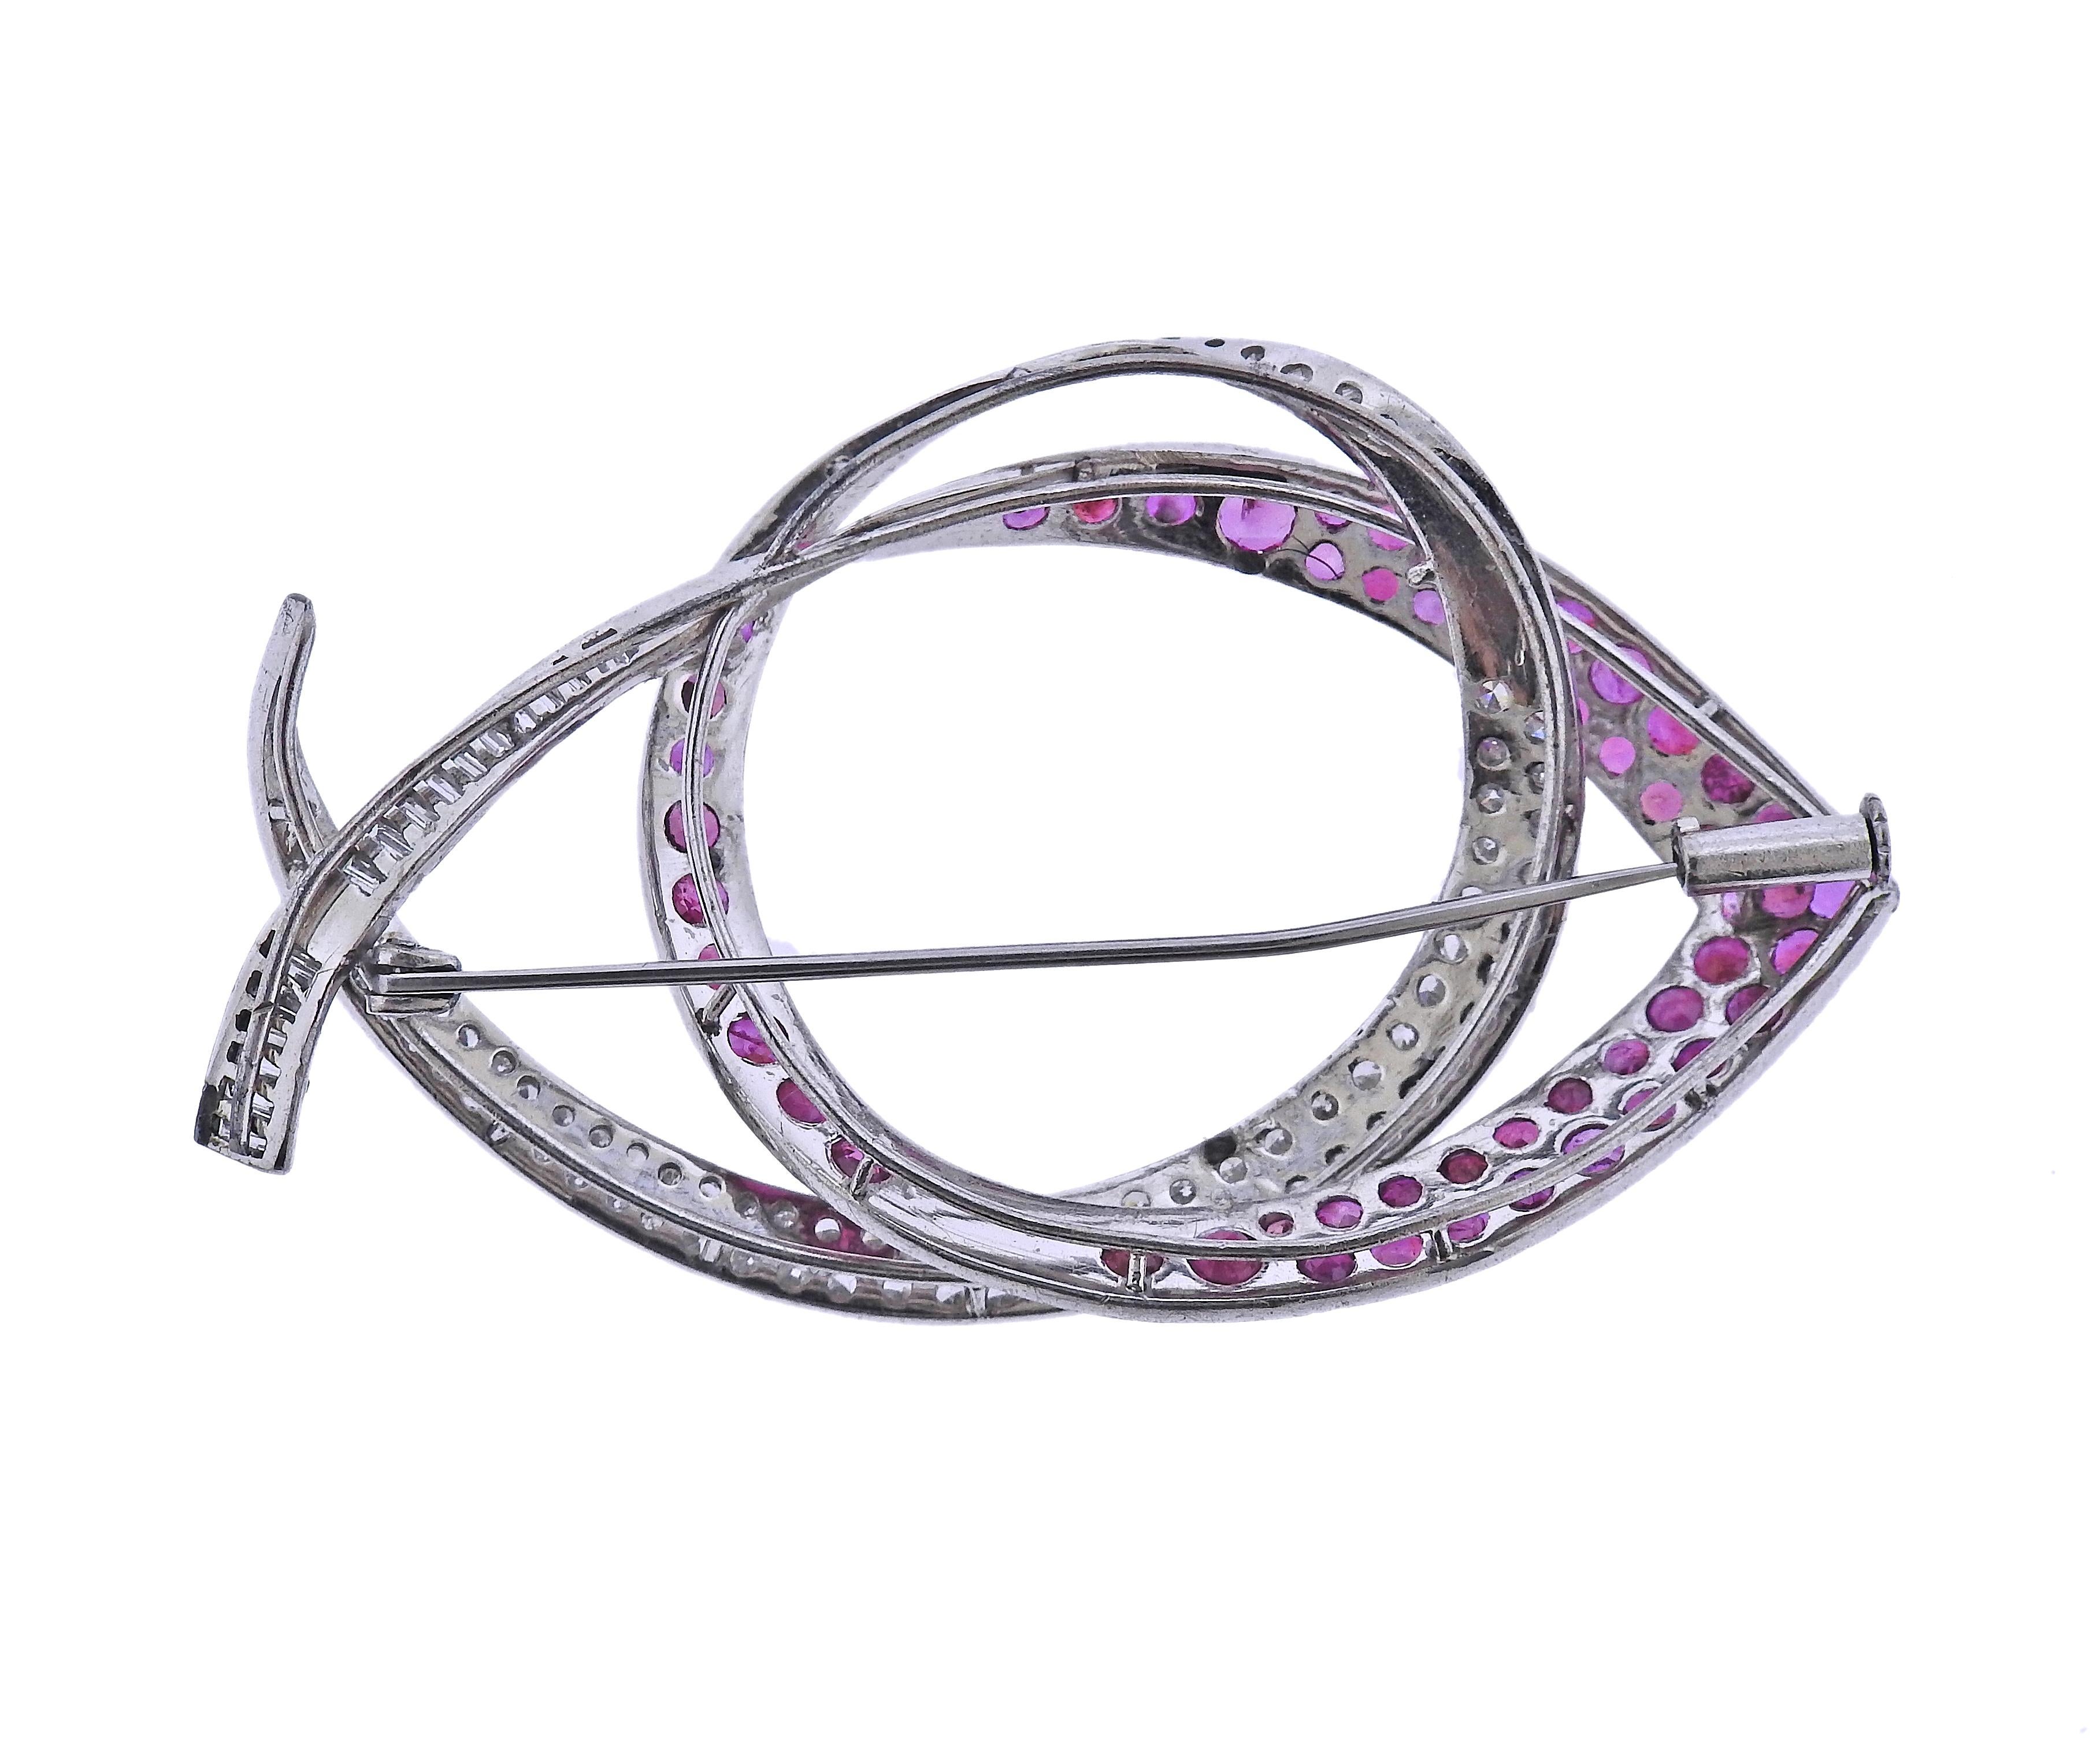 14k white gold fish motif brooch, with vibrant rubies and approx. 1.20ctw in diamonds.  Brooch measures 65mm x 40mm. Tested 14k. Weight - 15.8 grams. 